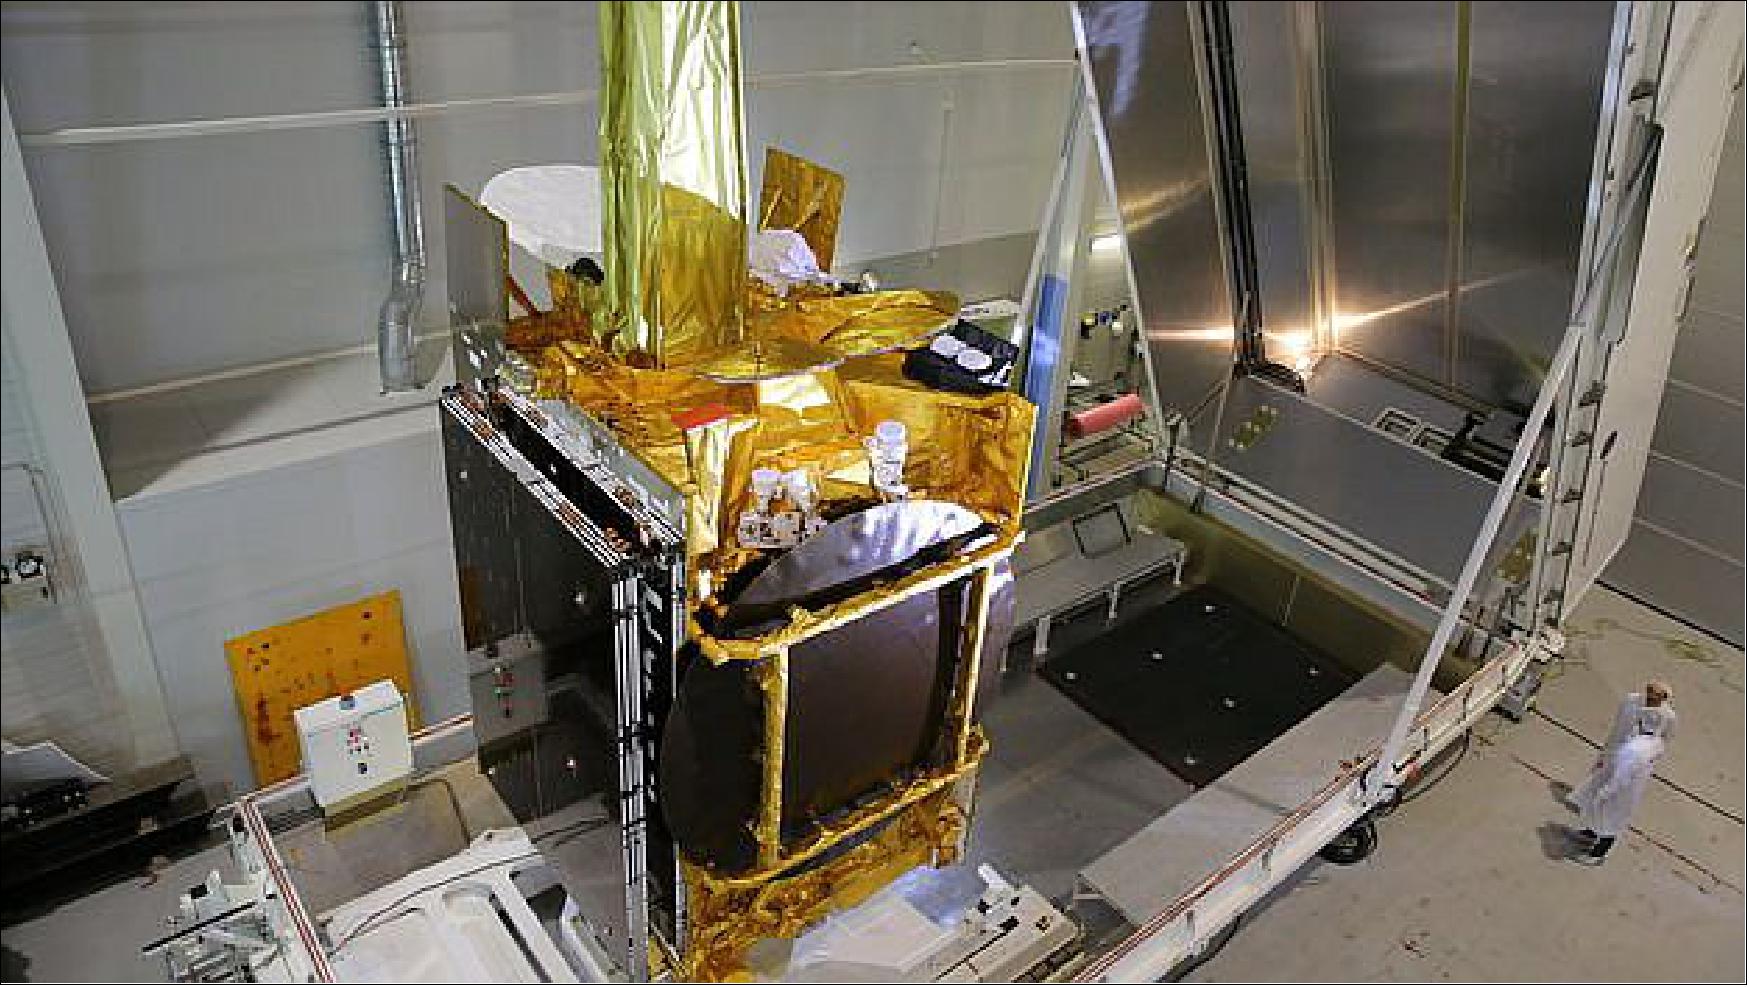 Figure 6: Photo of the EutelSat-9B/EDRS-A satellite in Toulouse prior to shippment (image credit: ESA, Airbus DS)